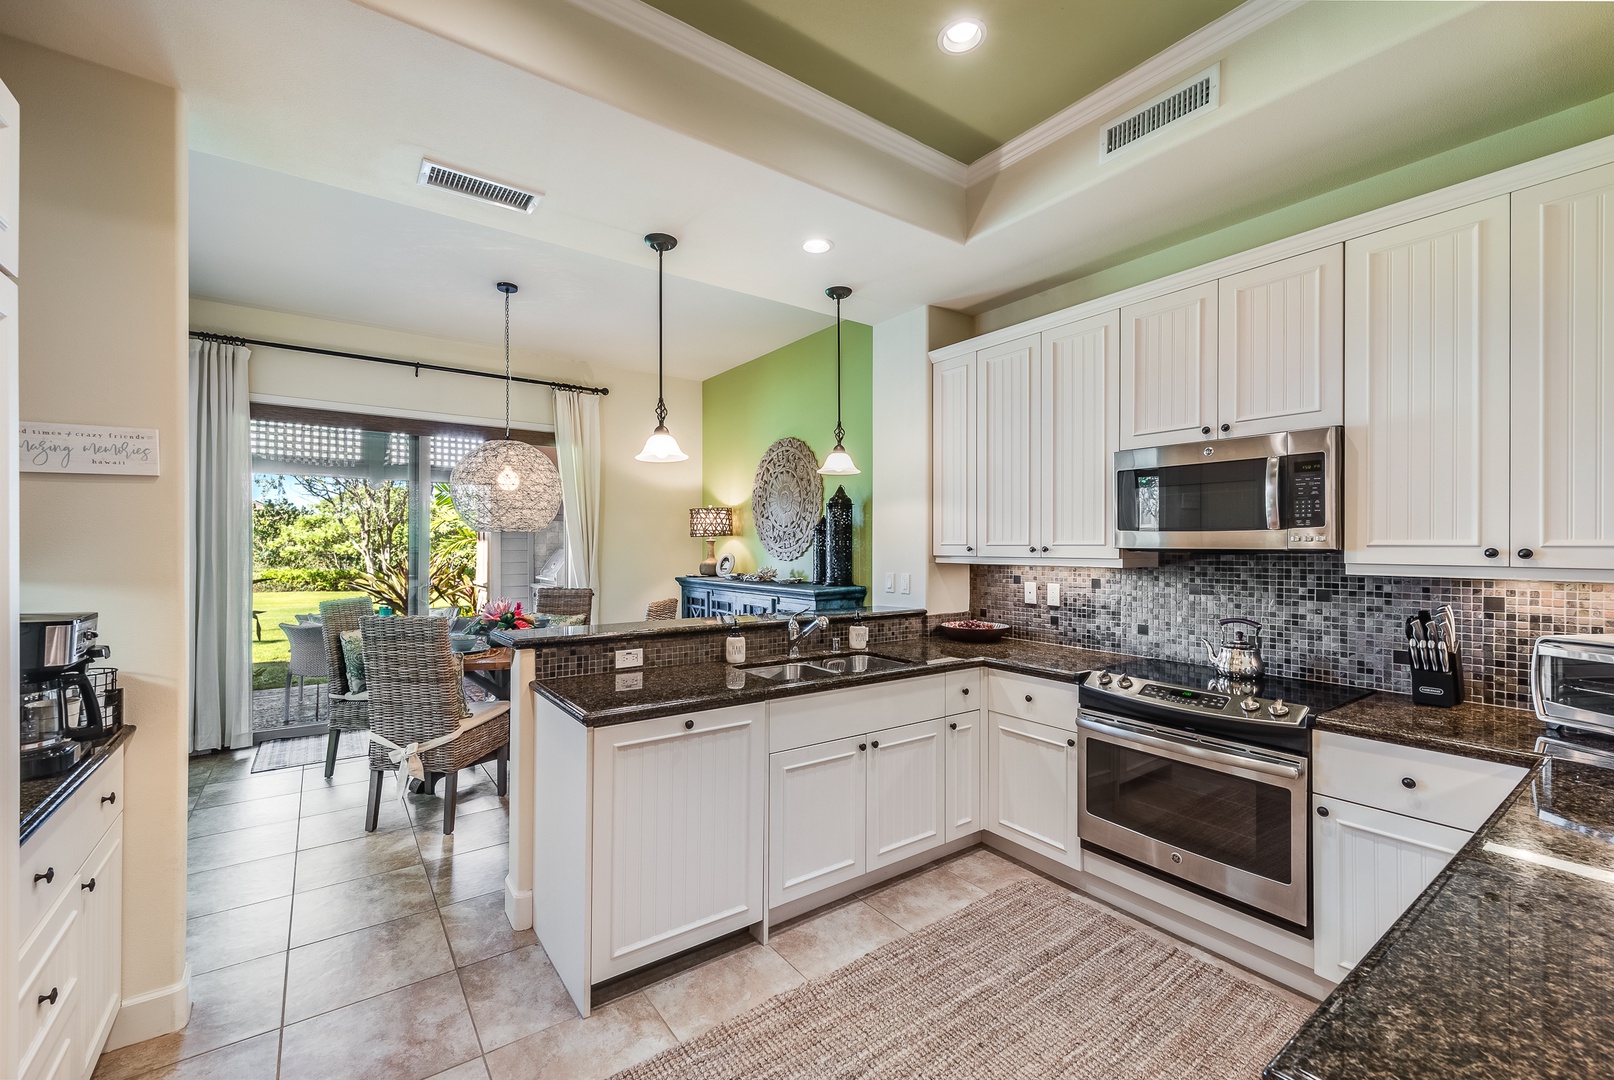 Kamuela Vacation Rentals, Kulalani 1701 at Mauna Lani - Gorgeous Kitchen Fully Equipped for All Your Gourmet Desires!